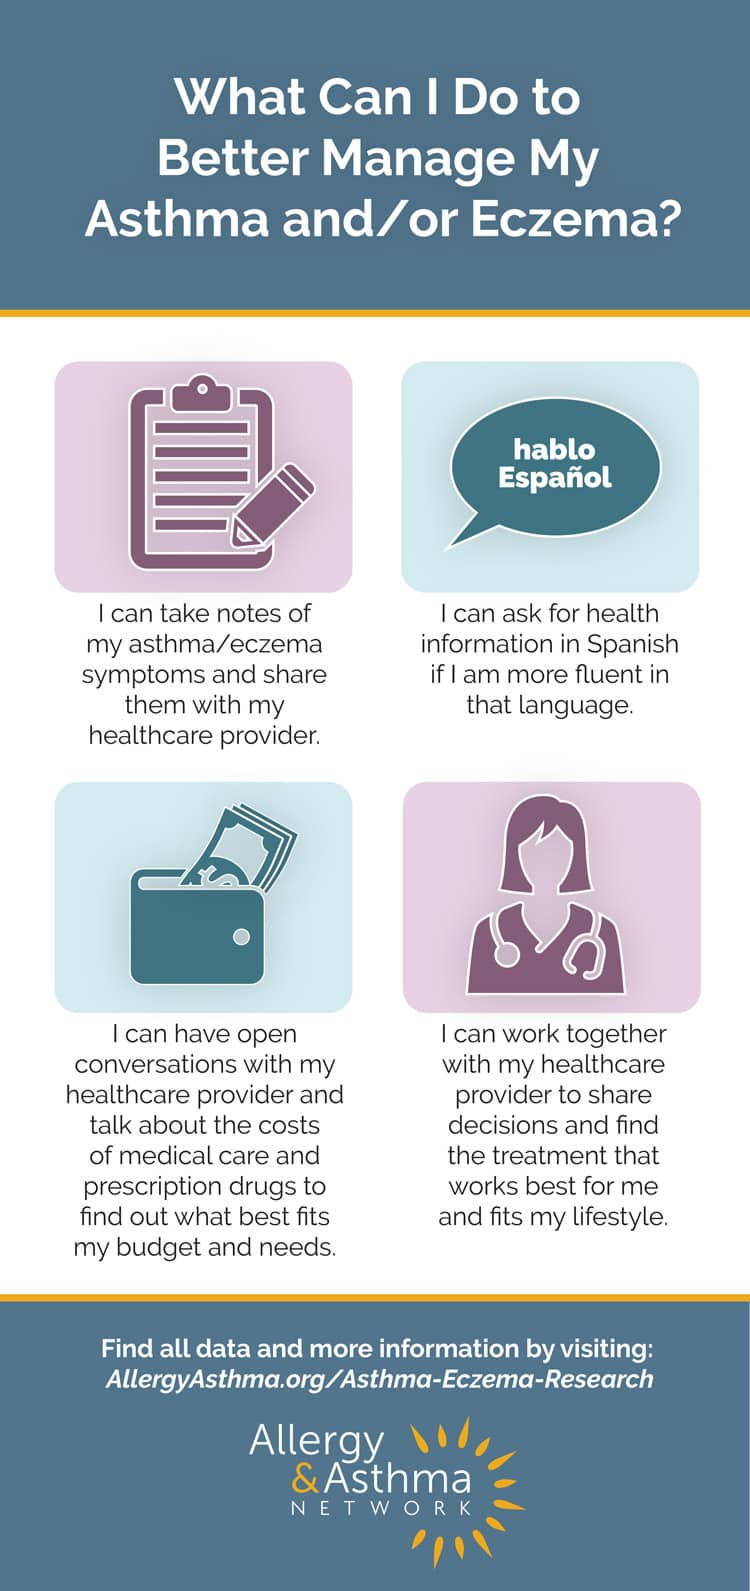 Infographic breaks down 4 actions you can take to help manage your asthma and/or eczema. They include: 1. Take notes to share with your doctor 2. Ask for health info in your language 3. Have hard conversations about costs of treatment with your provider. 4. Use shared decision making for getting the most benefit from your health car provider.